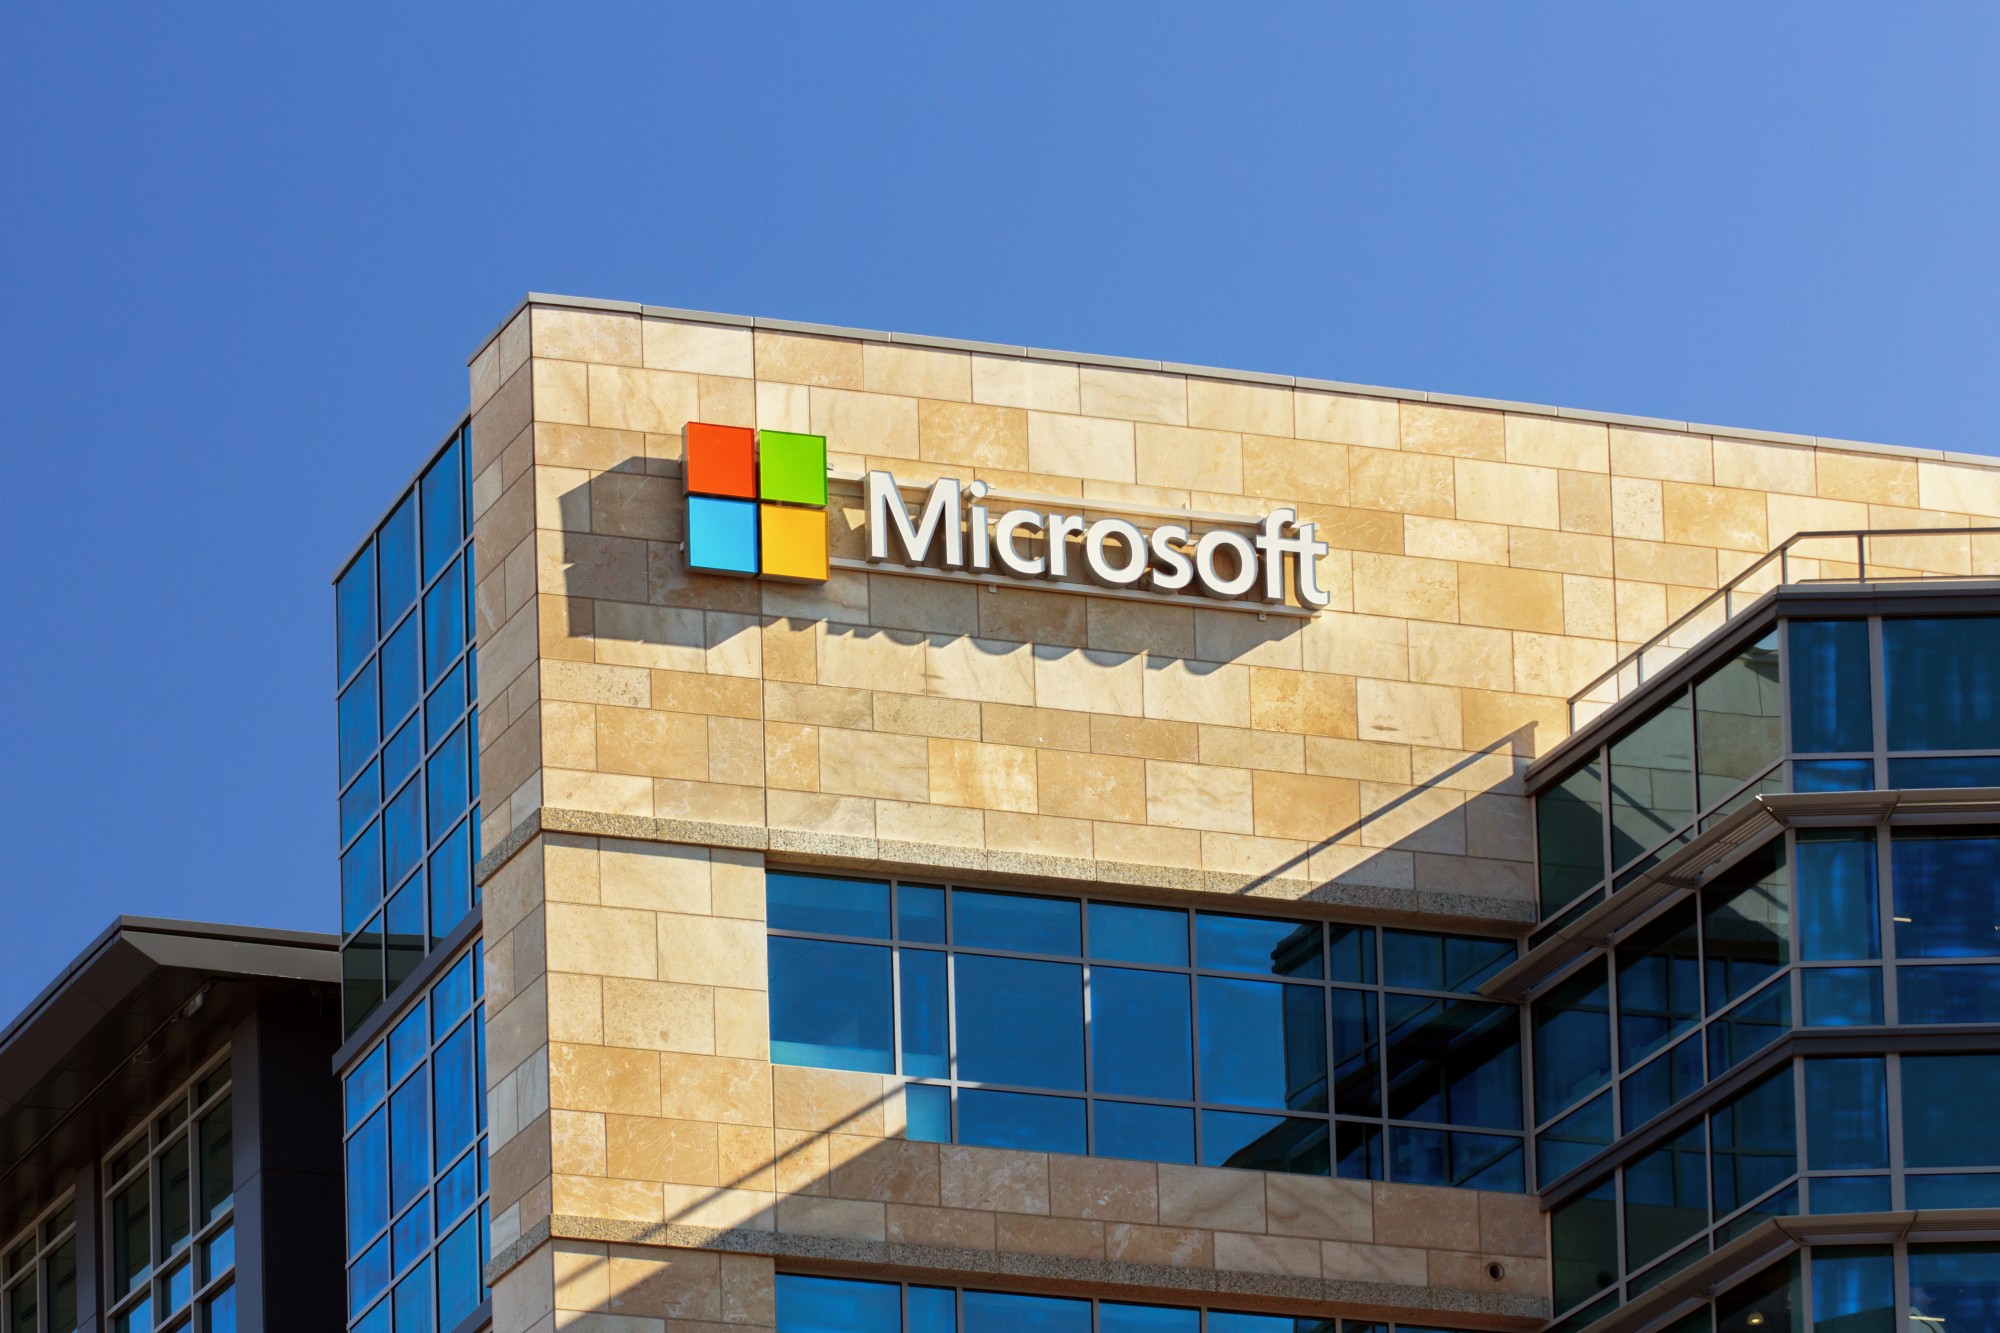 Microsoft To Use Hydrogen Fuel Cells for Data Centers